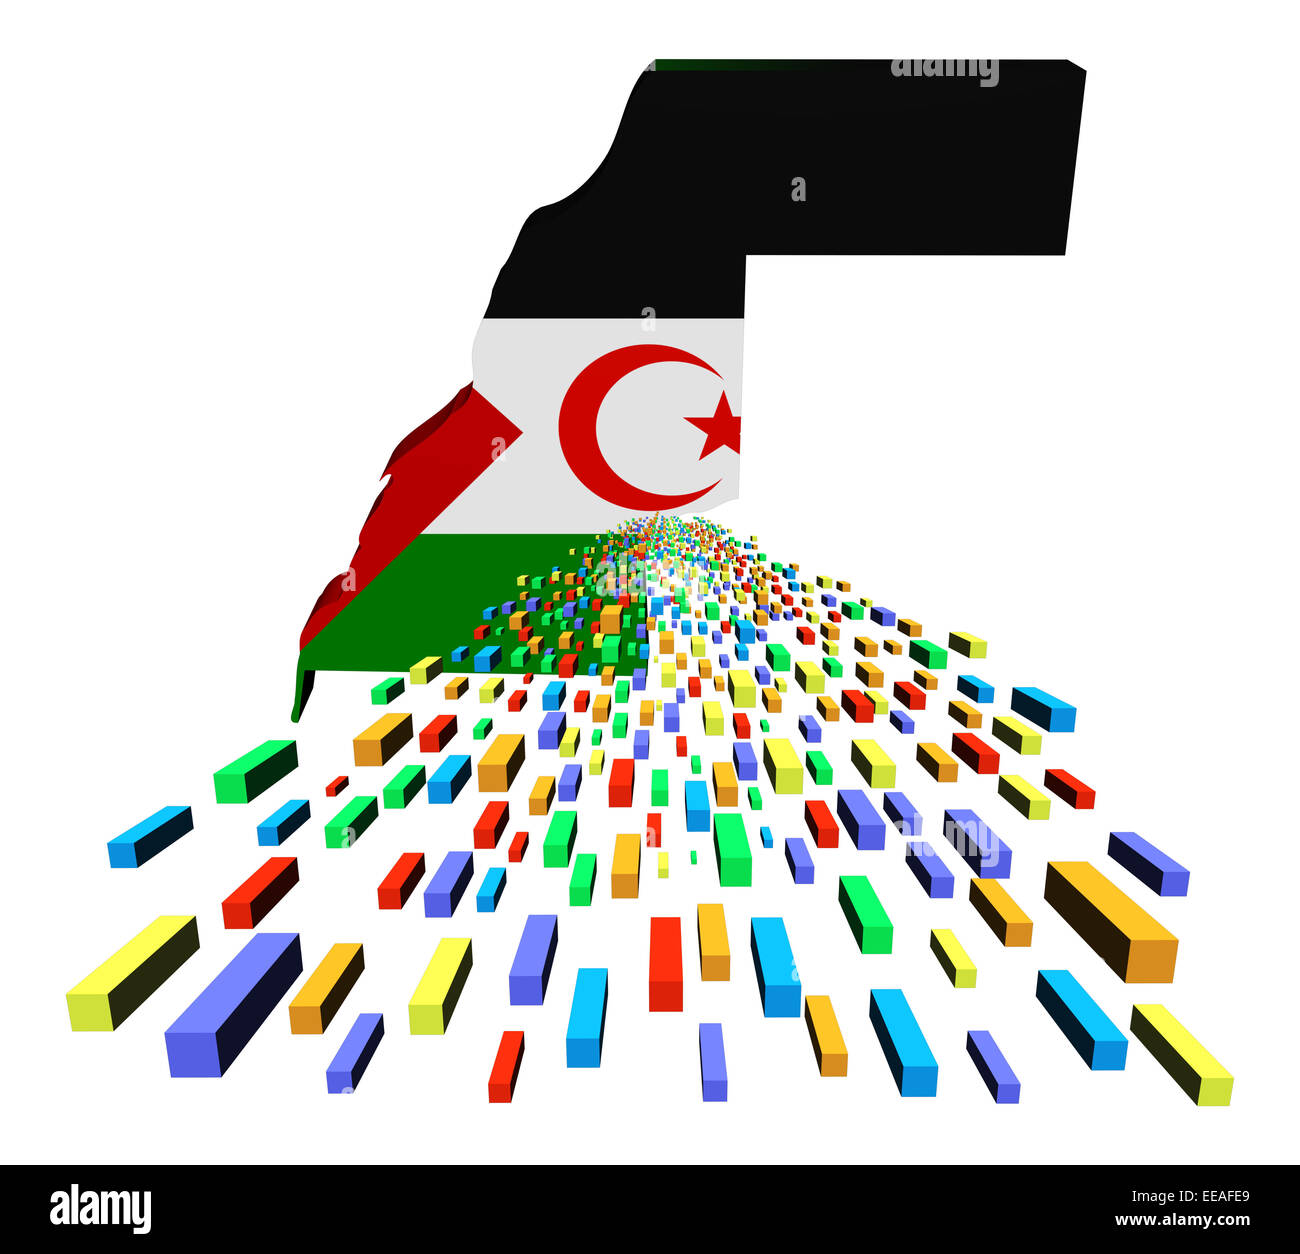 Western Sahara map flag with containers illustration Stock Photo